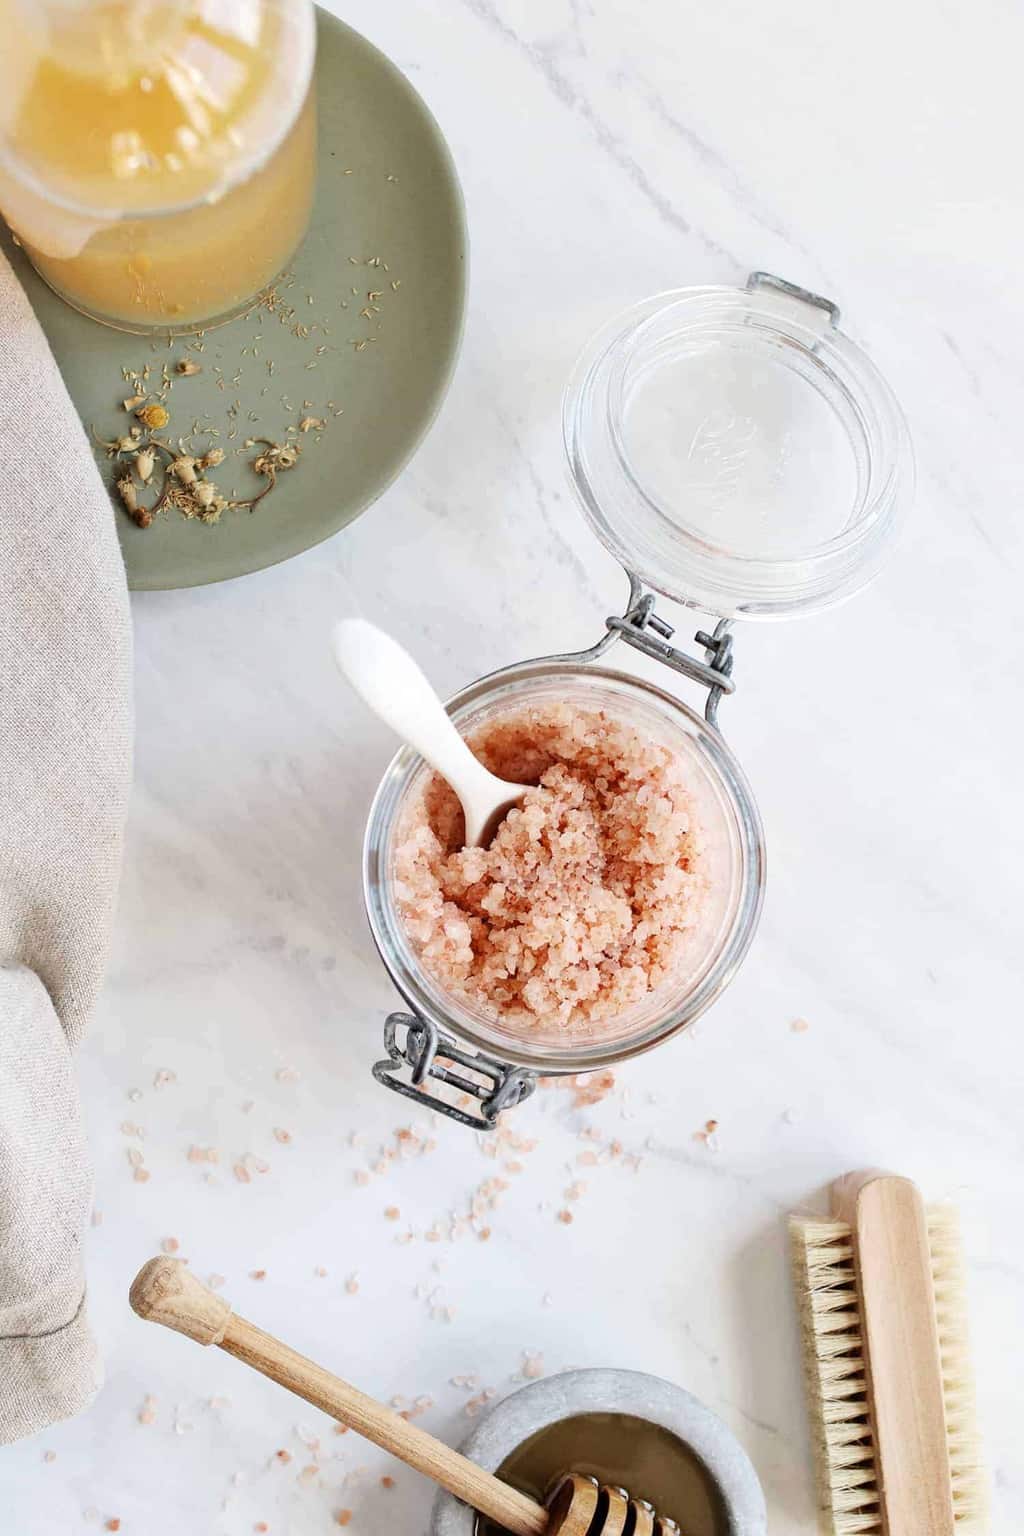 This detoxifying apple cider vinegar scrub uses finely ground pink Himalayan salt to slough away dead skin and deep clean hair follicles.